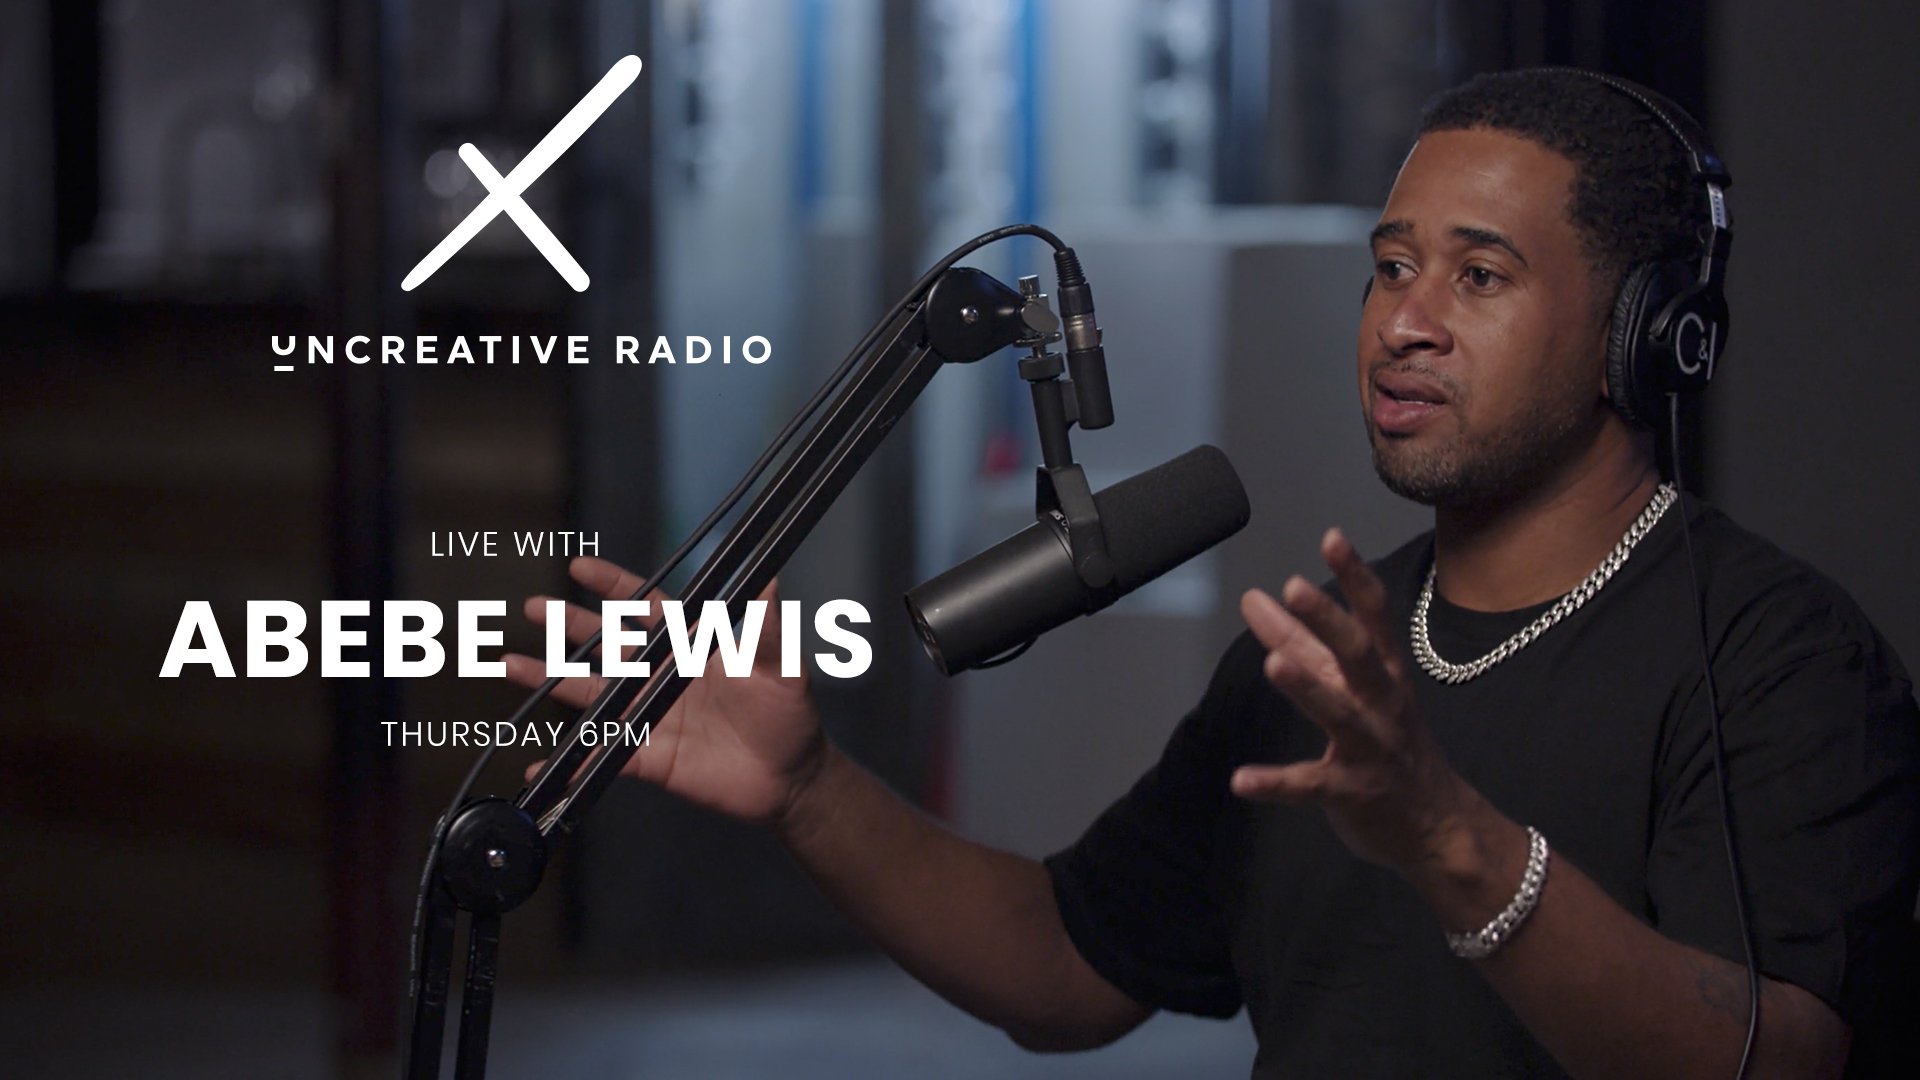 Uncreative Radio Live with Abebe Lewis title wearing black headphones by microphone gesturing with arms and hands in the air